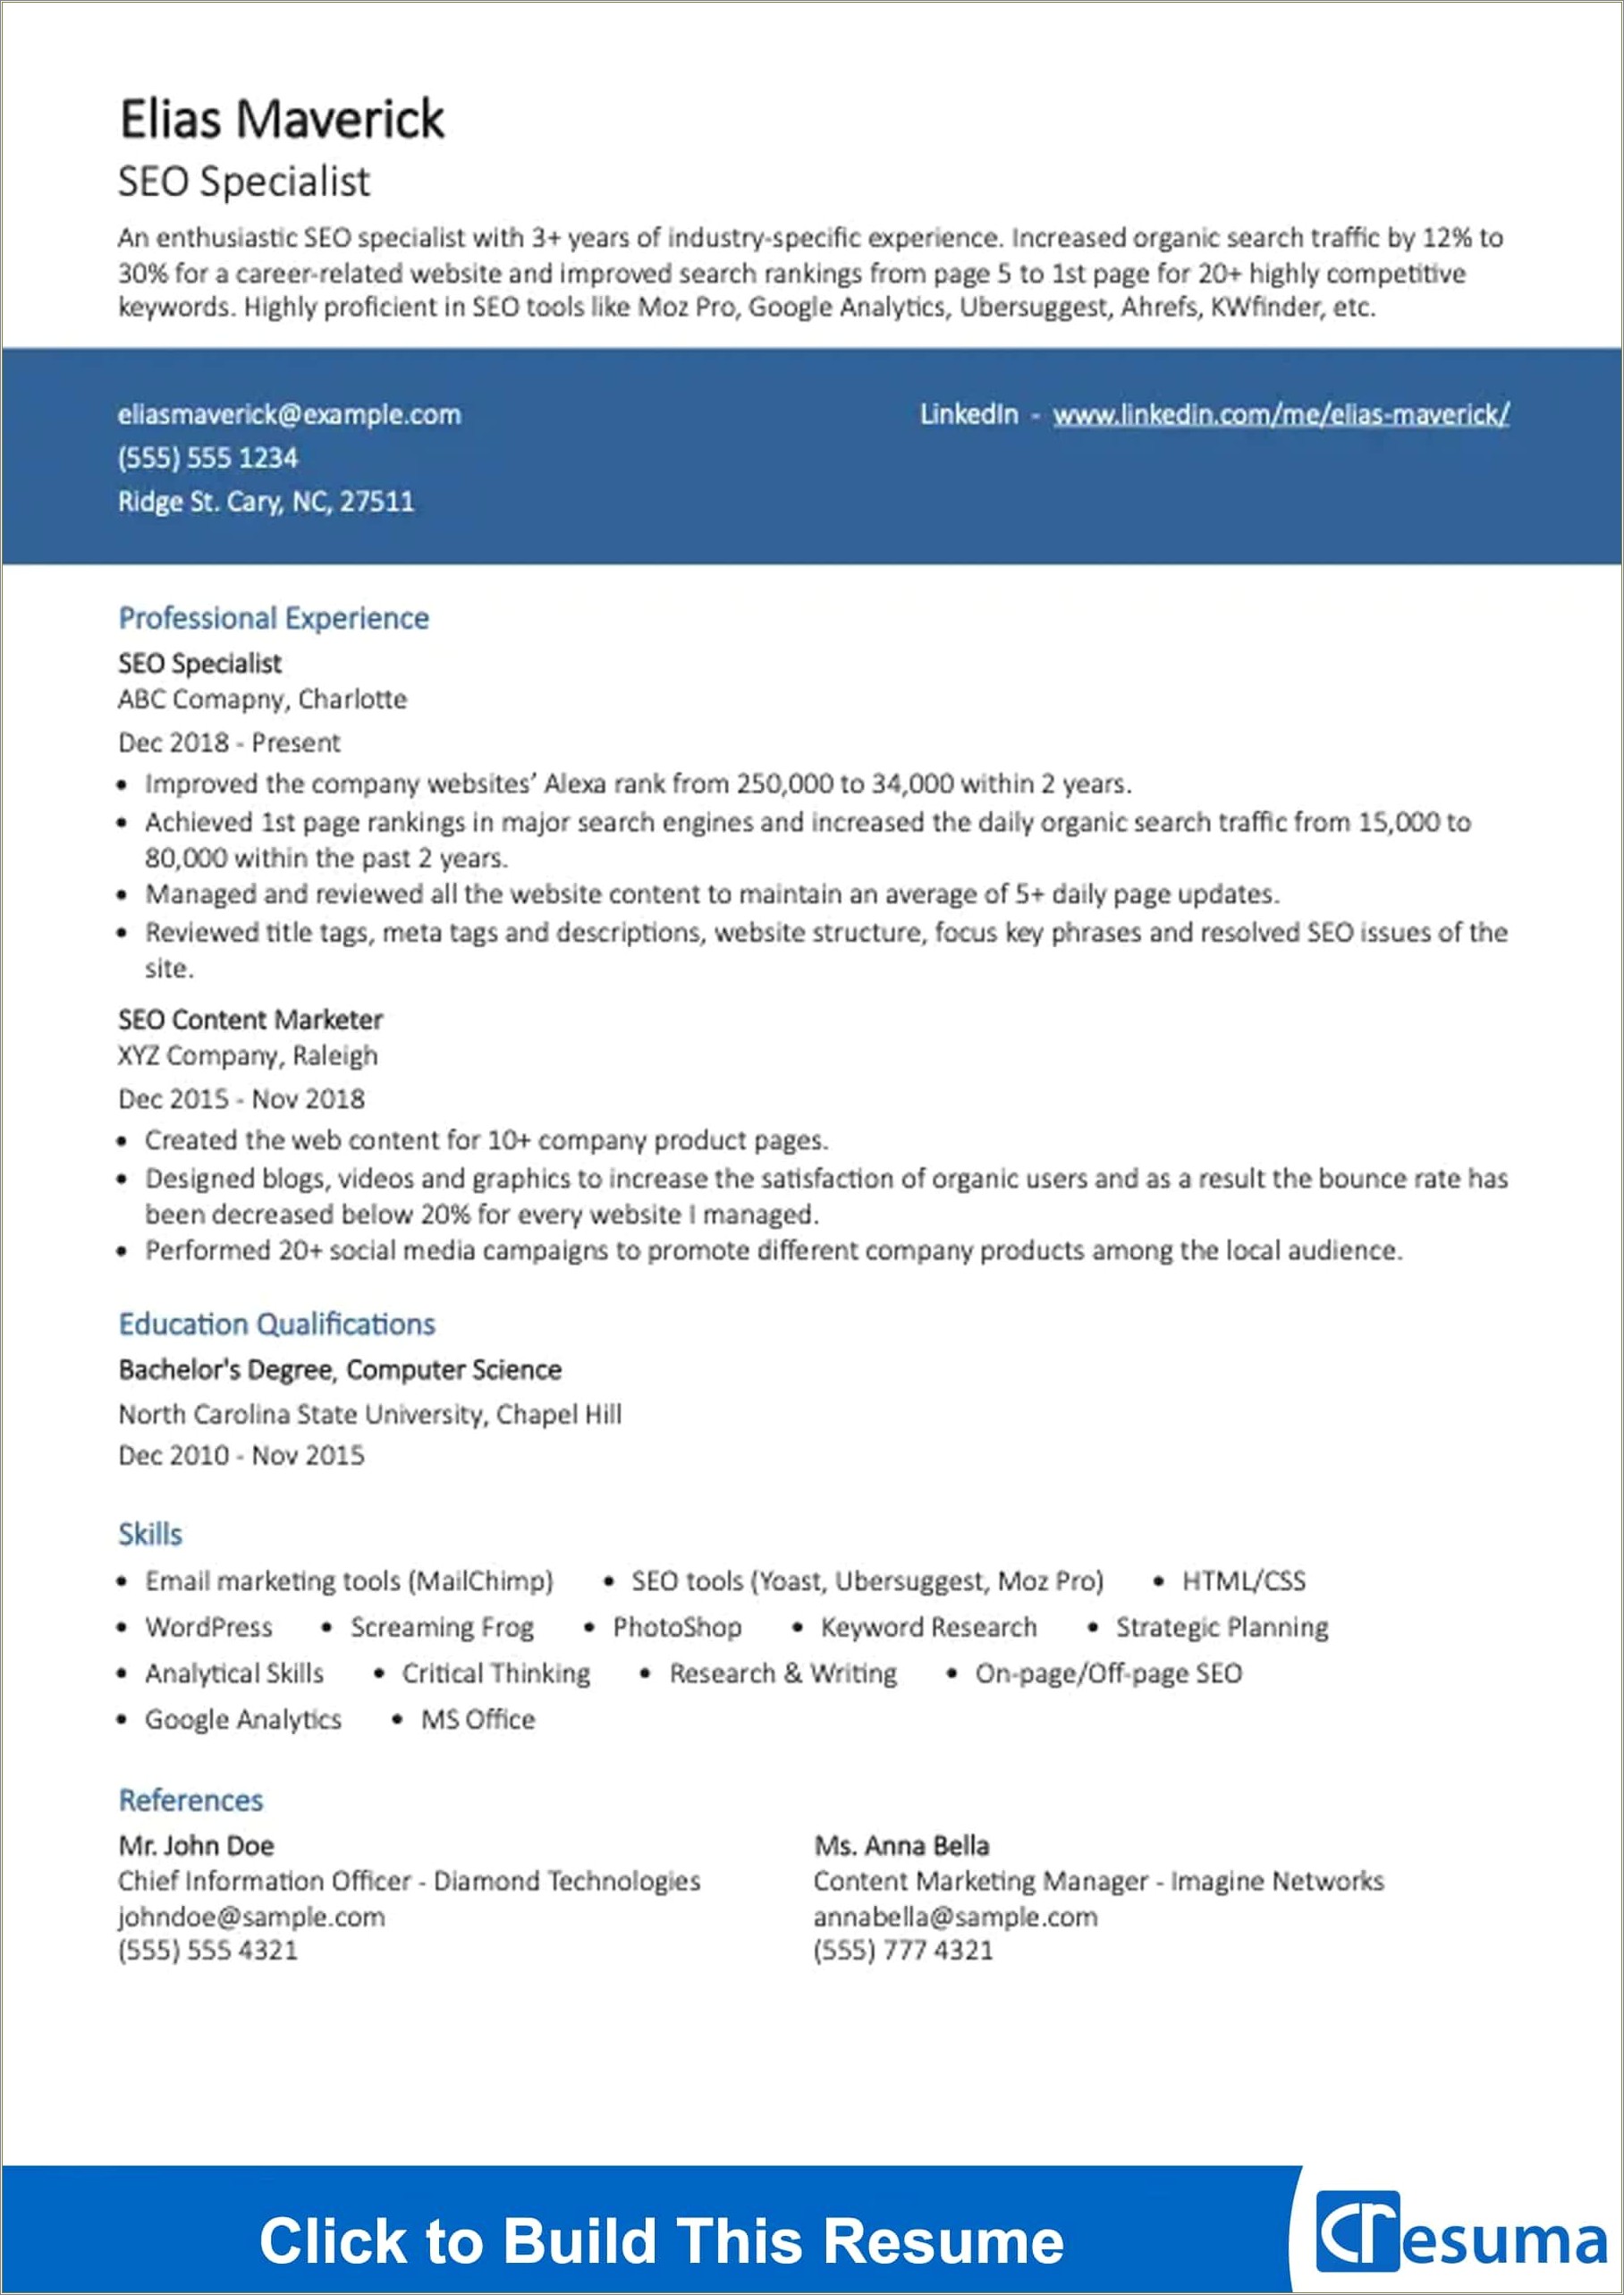 Qualifications Sample Resume Ms Office Proficiency